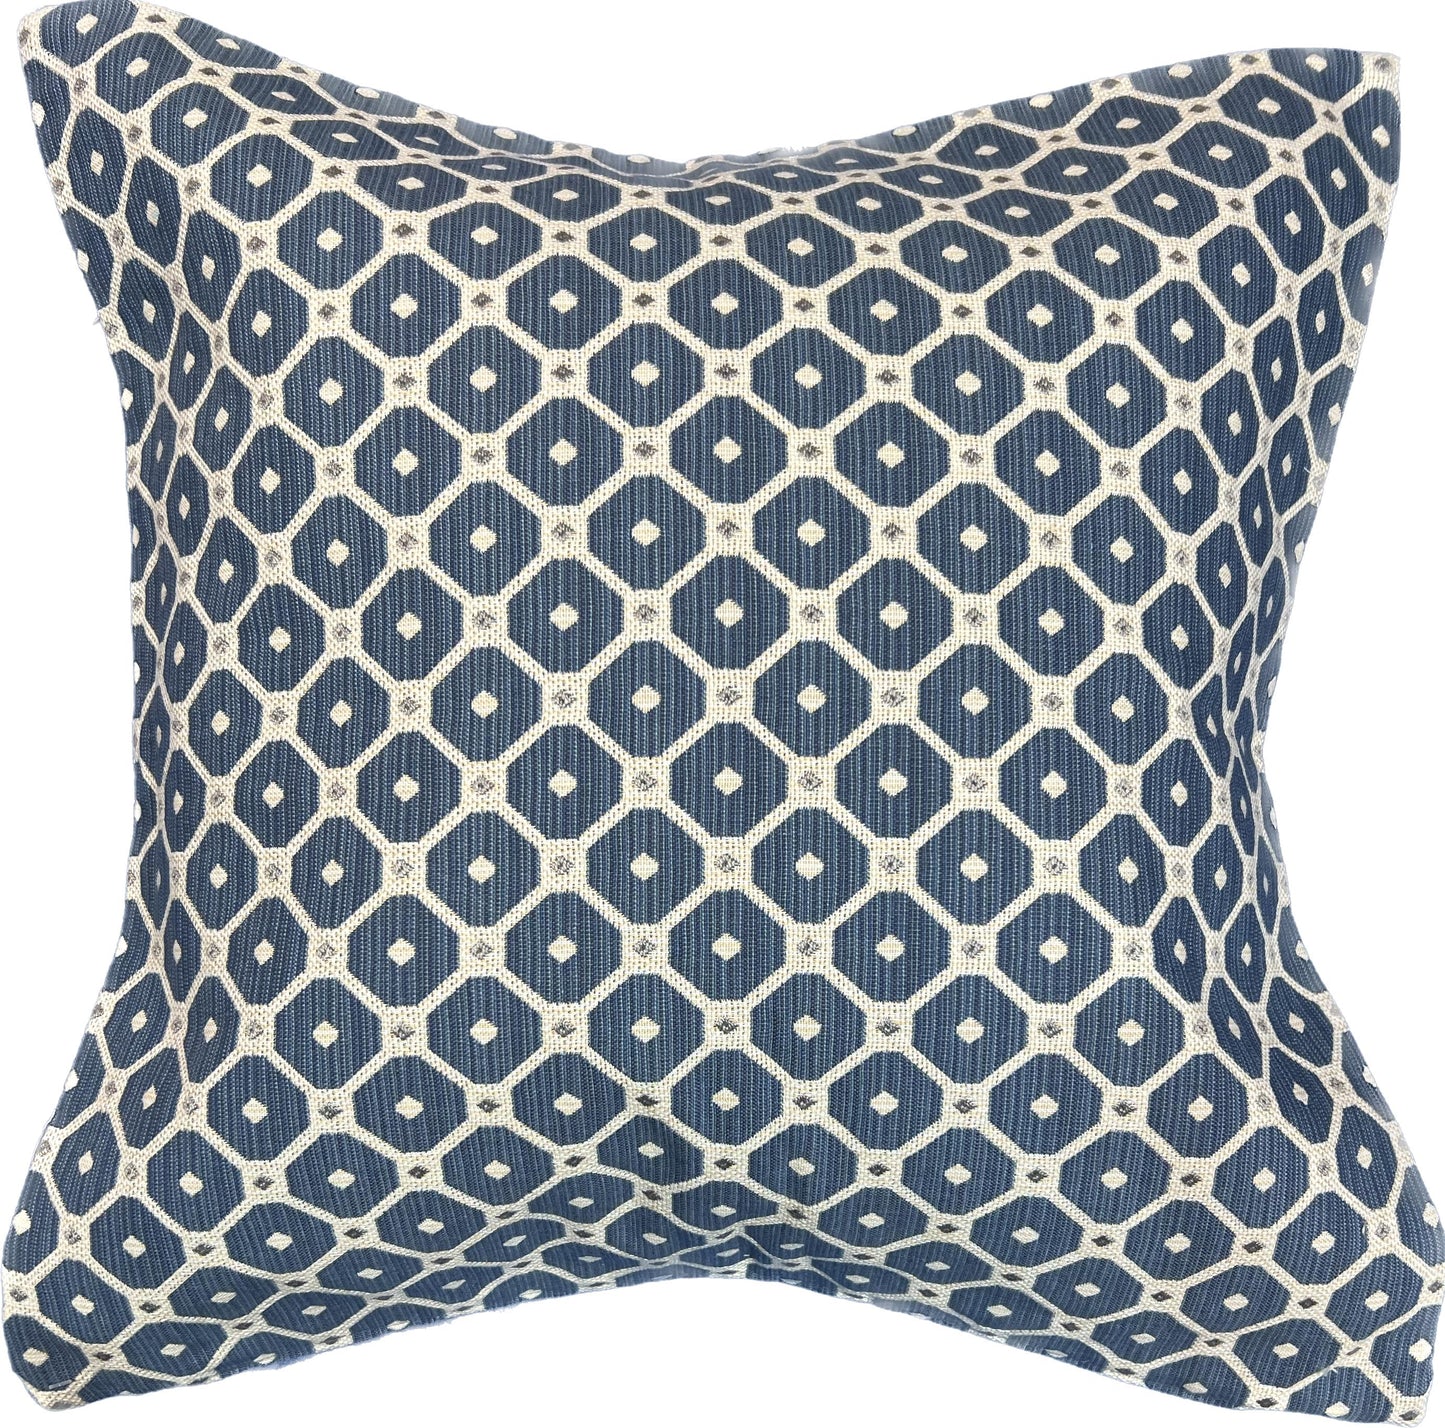 18"x18"  Small Scale Pillow Cover